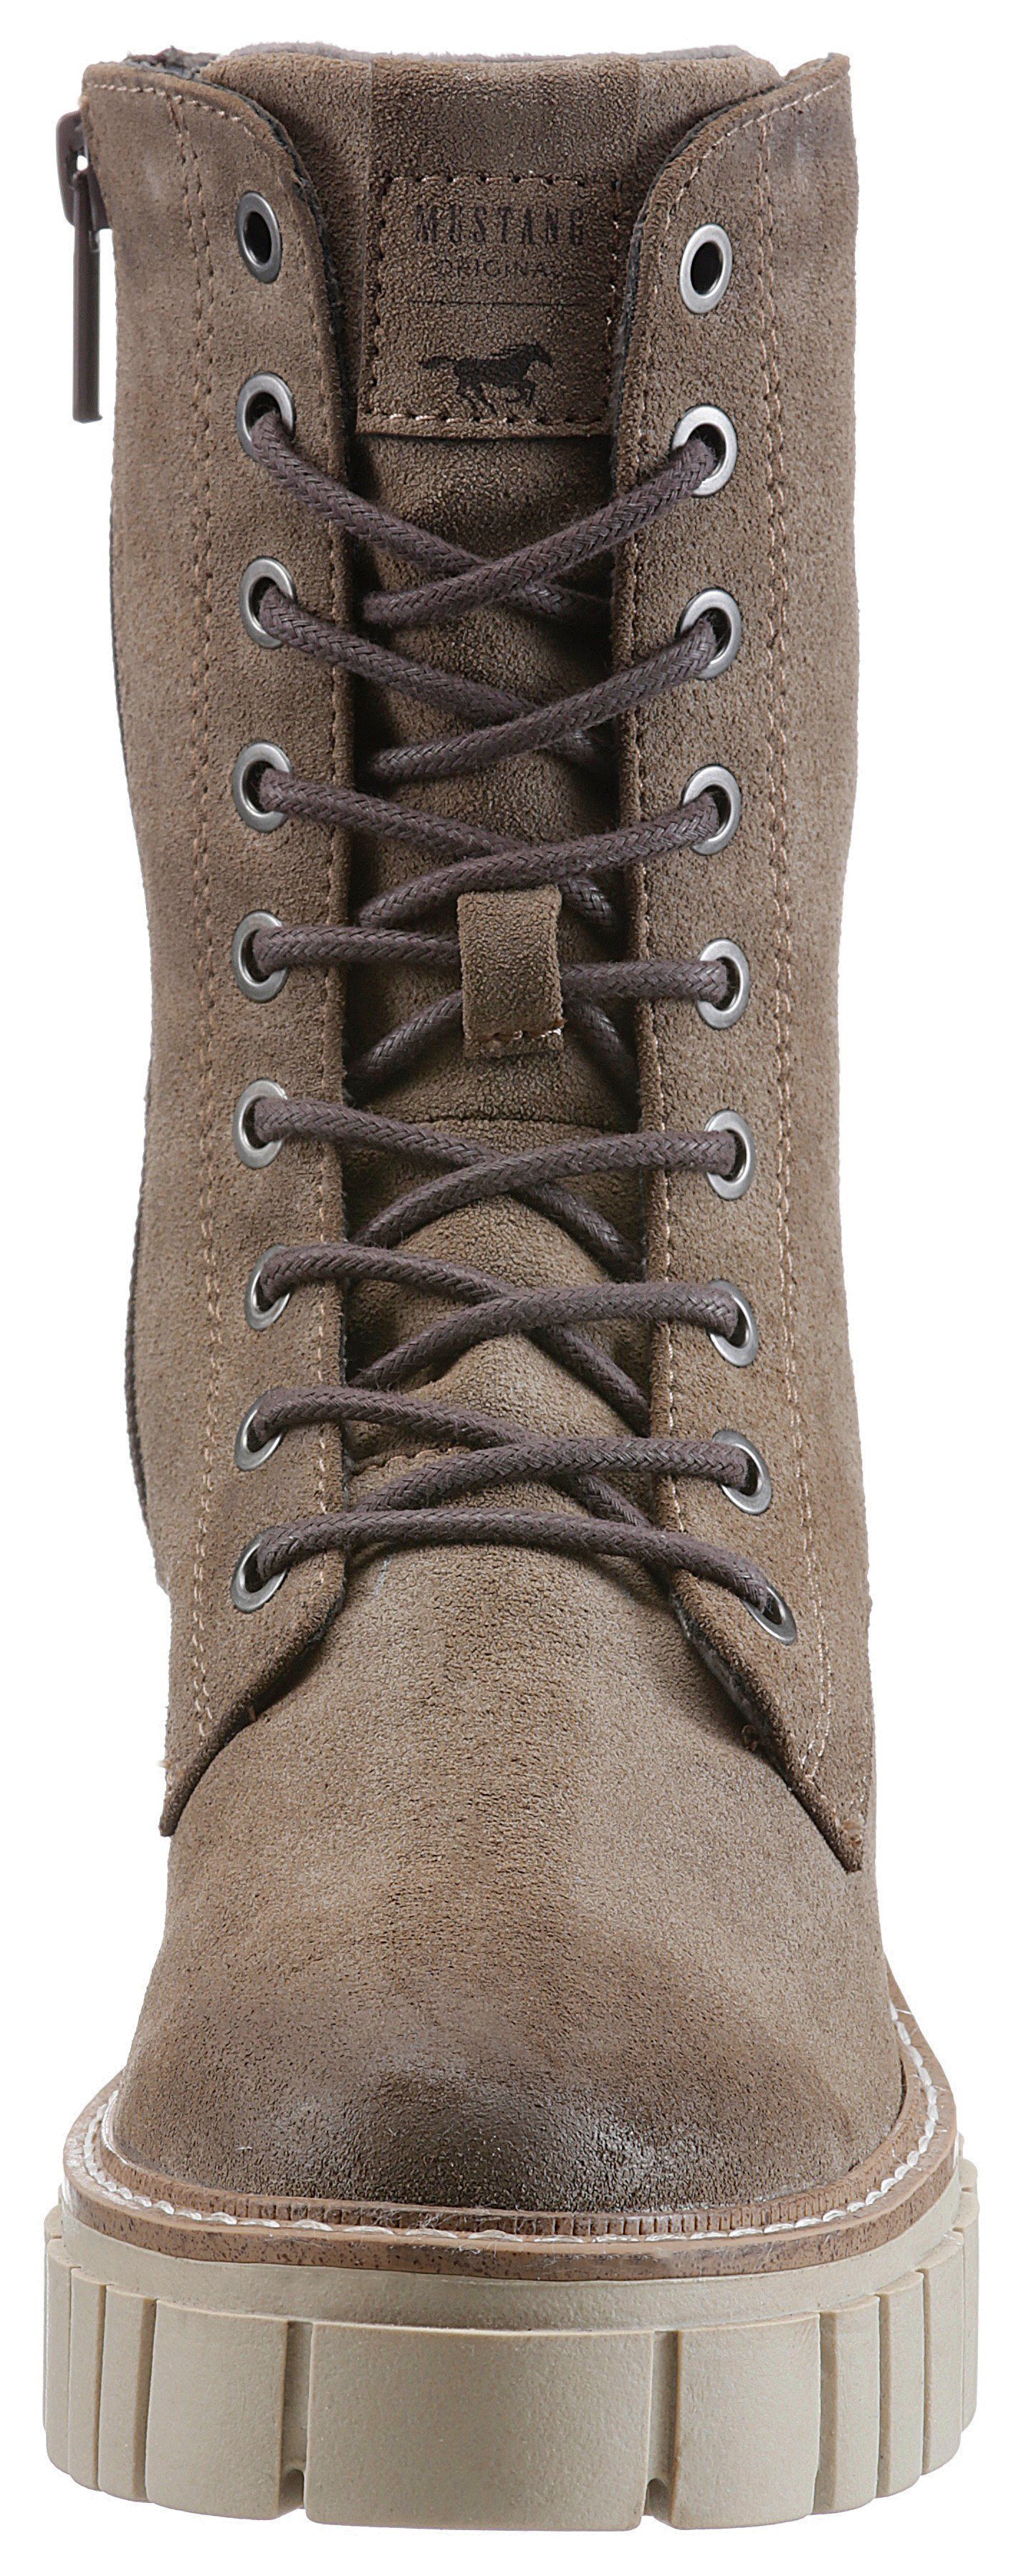 Mustang Shoes Schnürboots mit Profilsohle taupe